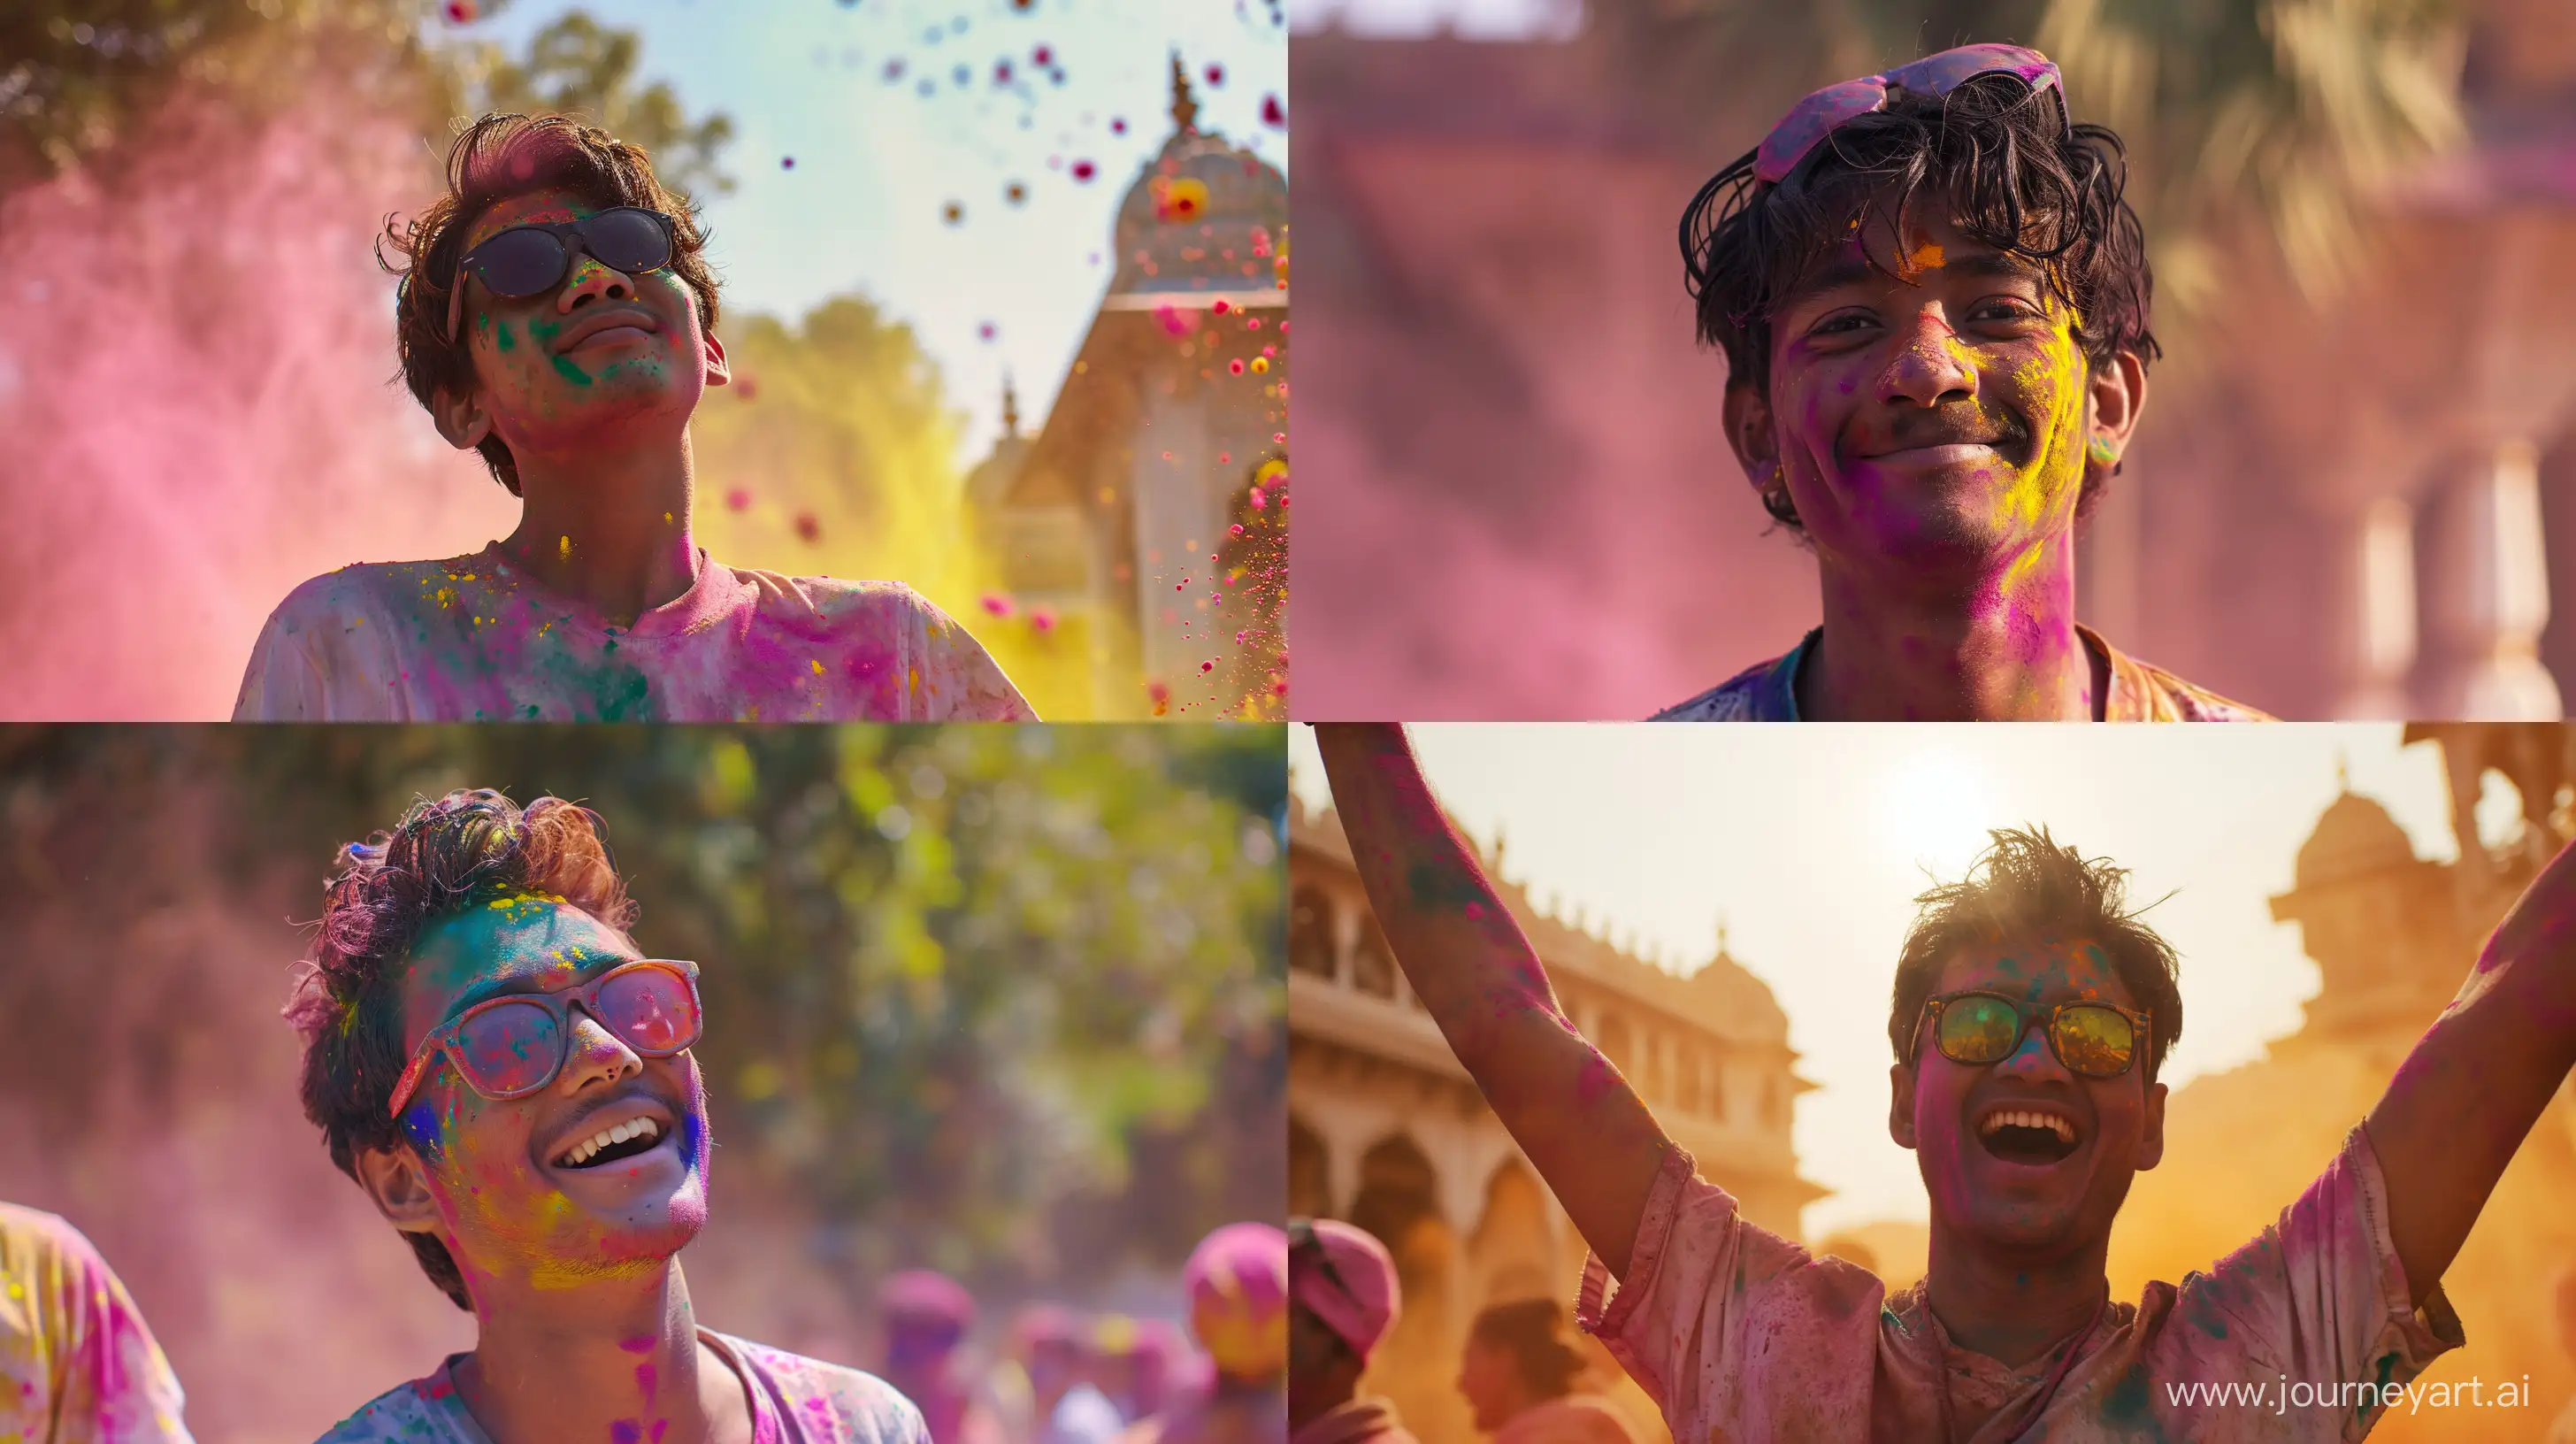 Indonesian-Man-Celebrating-Holi-in-Rajasthan-Vibrant-Movie-Scene-with-Epic-Royal-Vibes